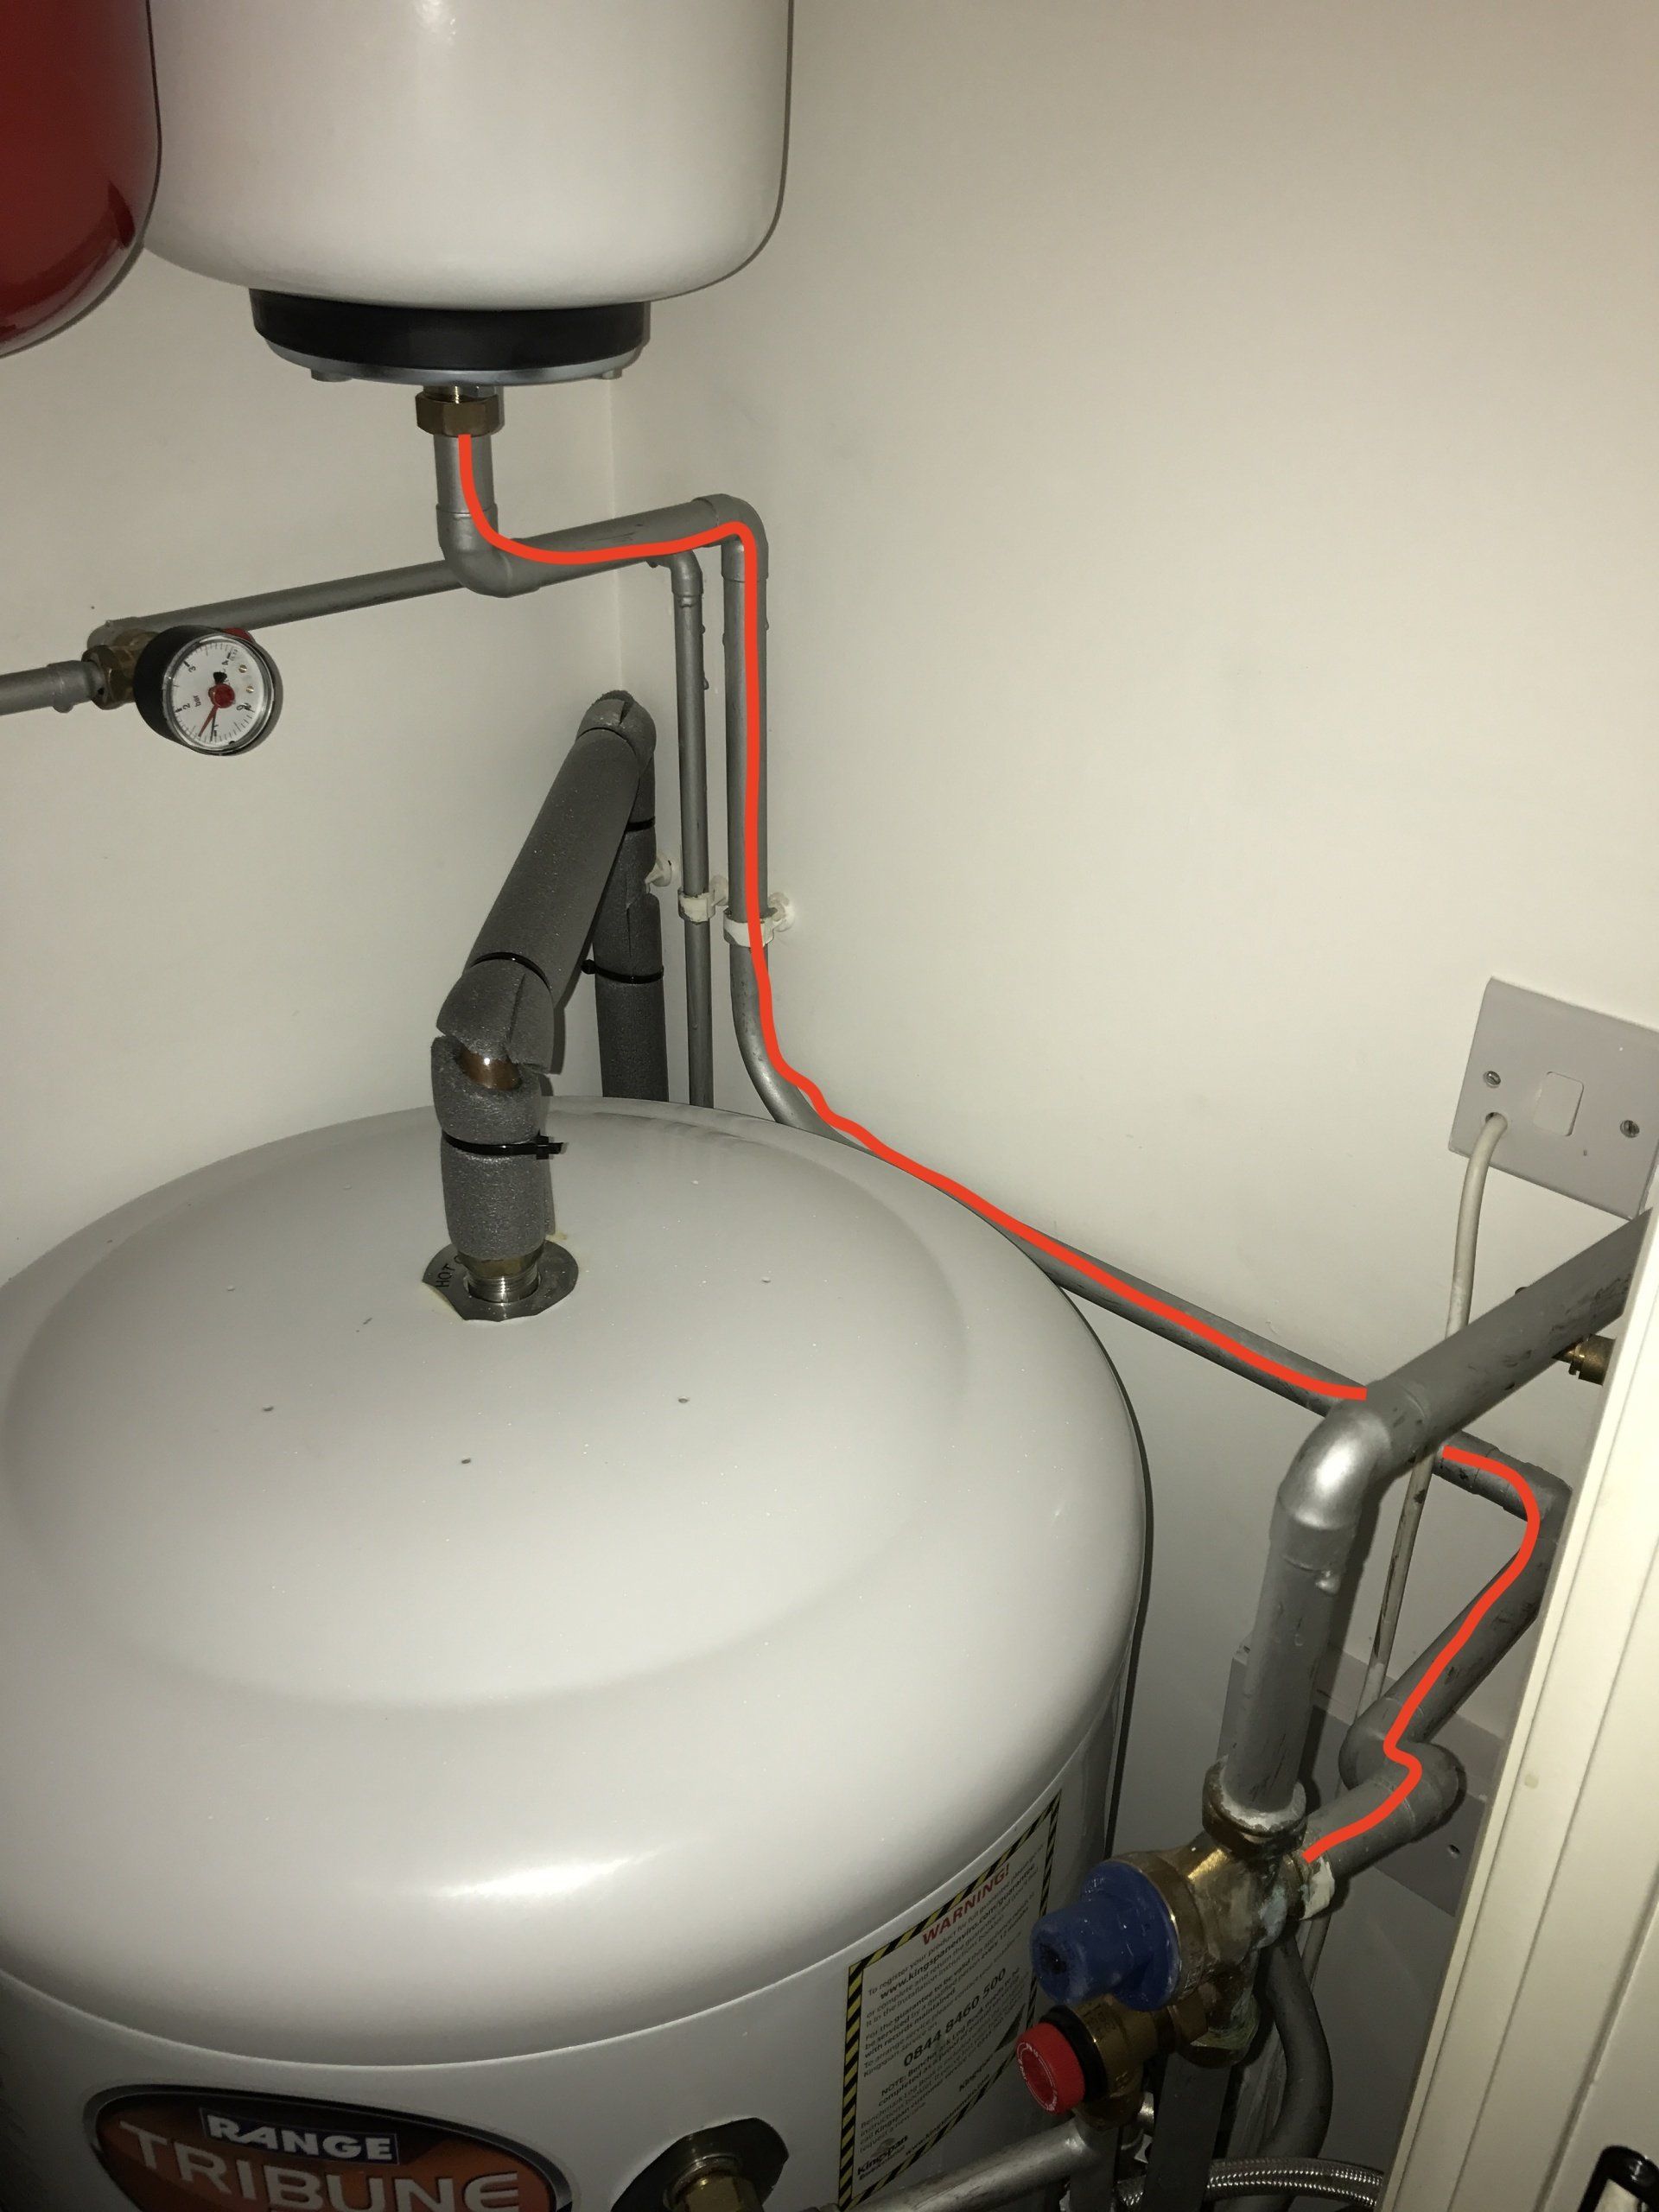 unvented cylinder issues